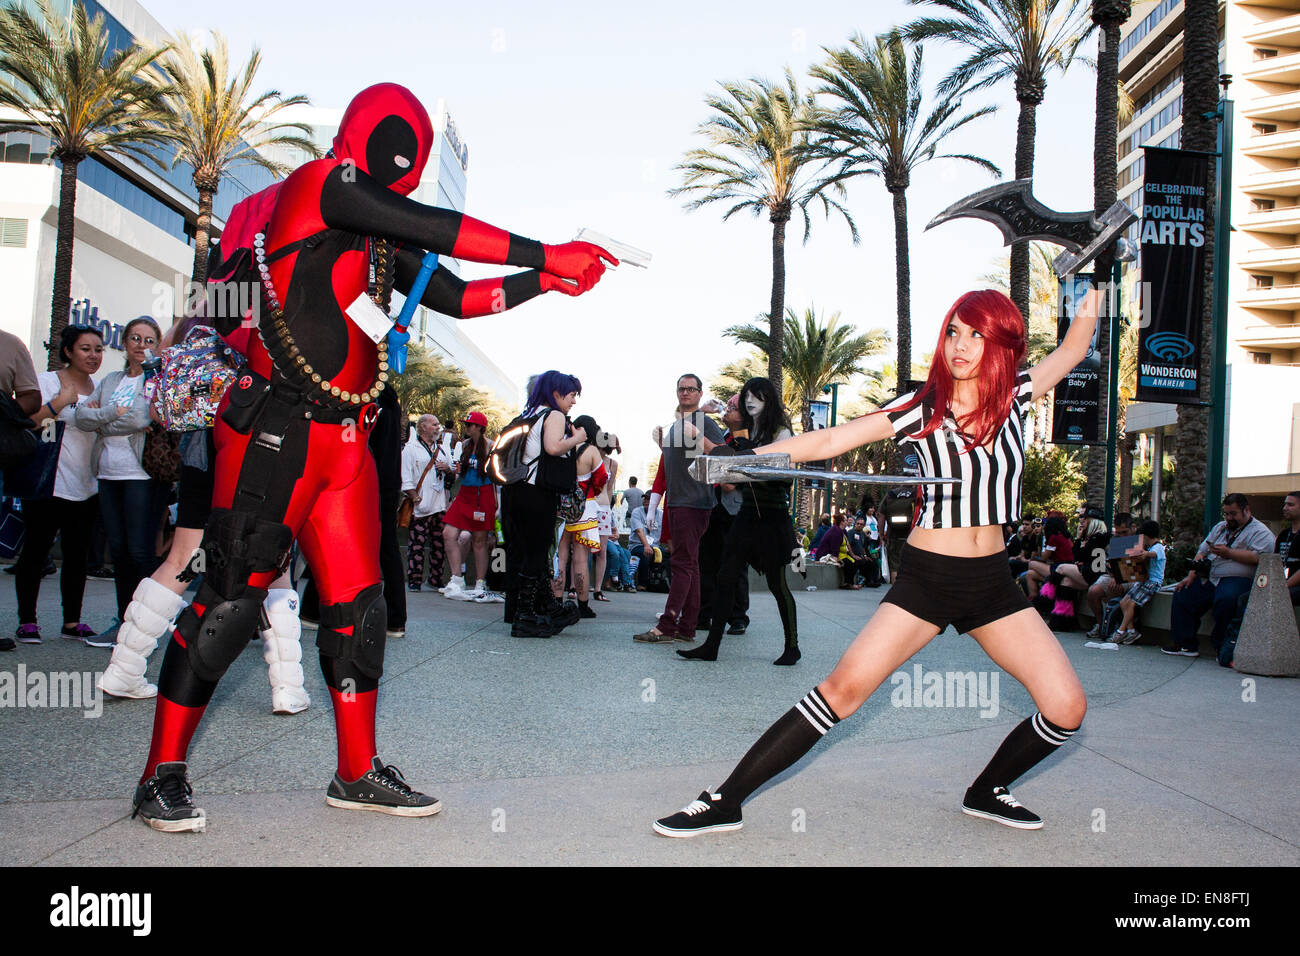 Two cosplayers at the Wondercon comics and pop culture convention in Anaheim California April 2014. Stock Photo